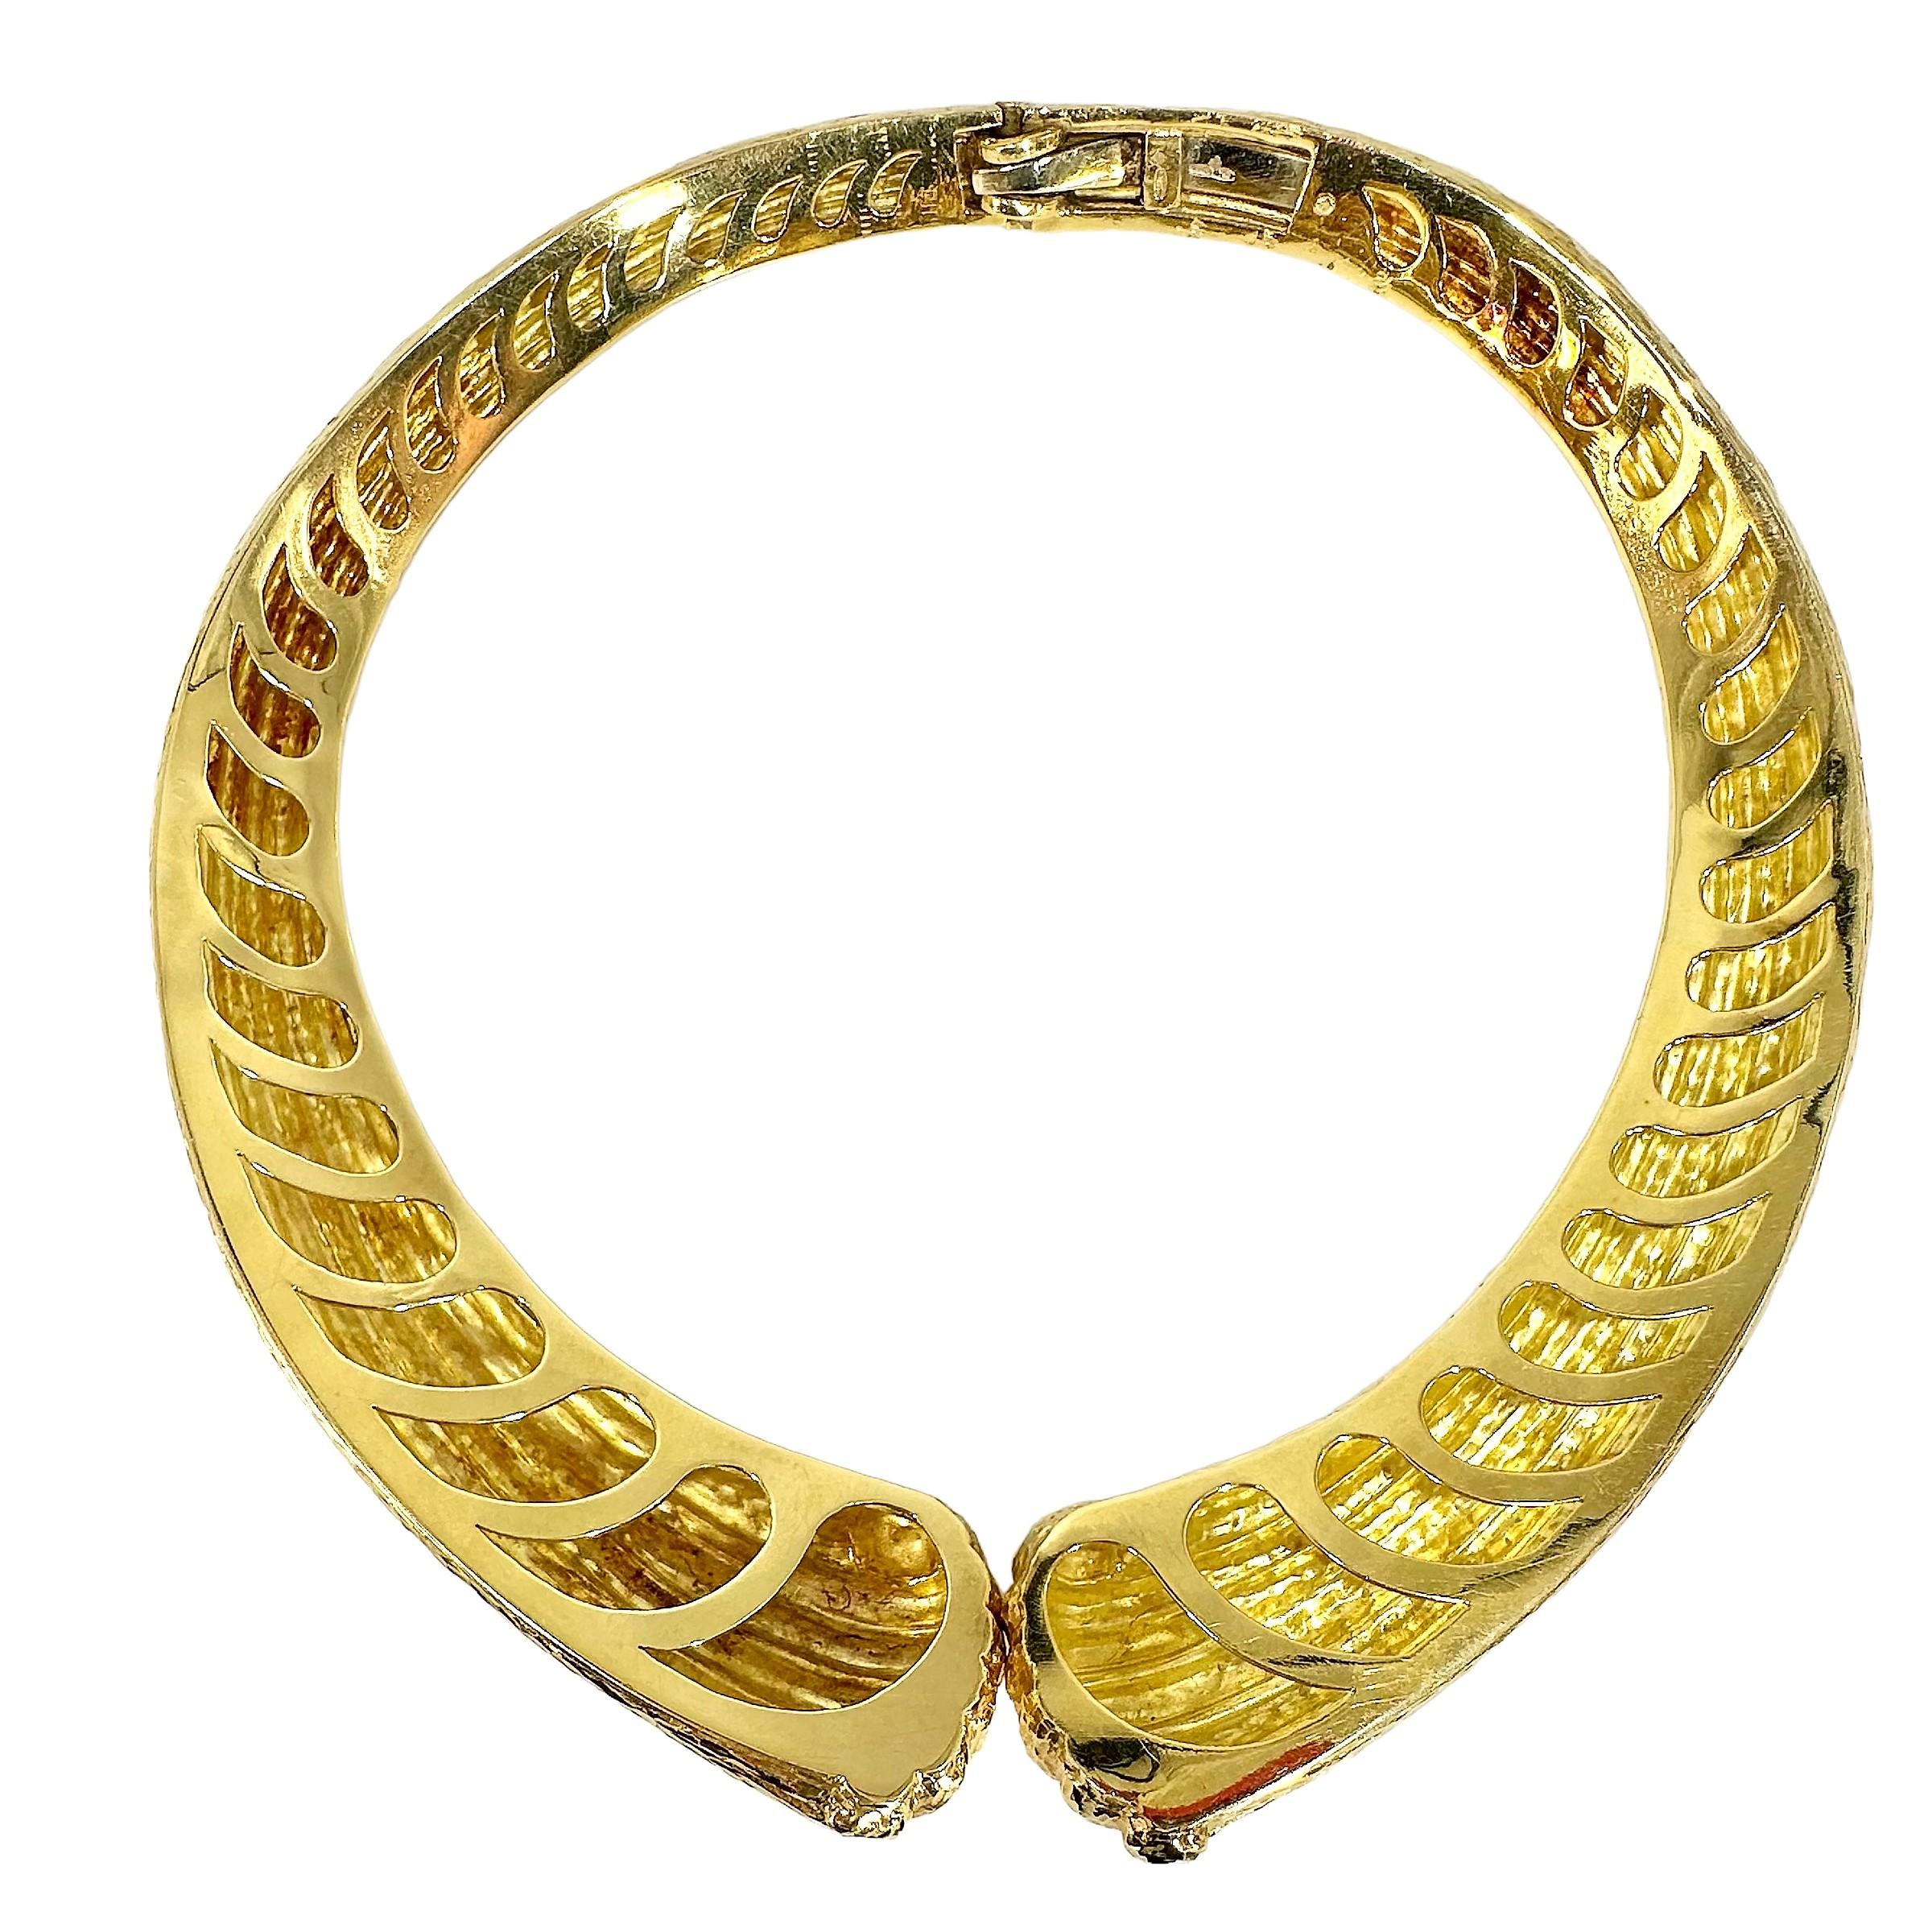 Massive 18K Yellow Gold, Hammered Finish, Italian Scroll Motif Choker Necklace For Sale 1